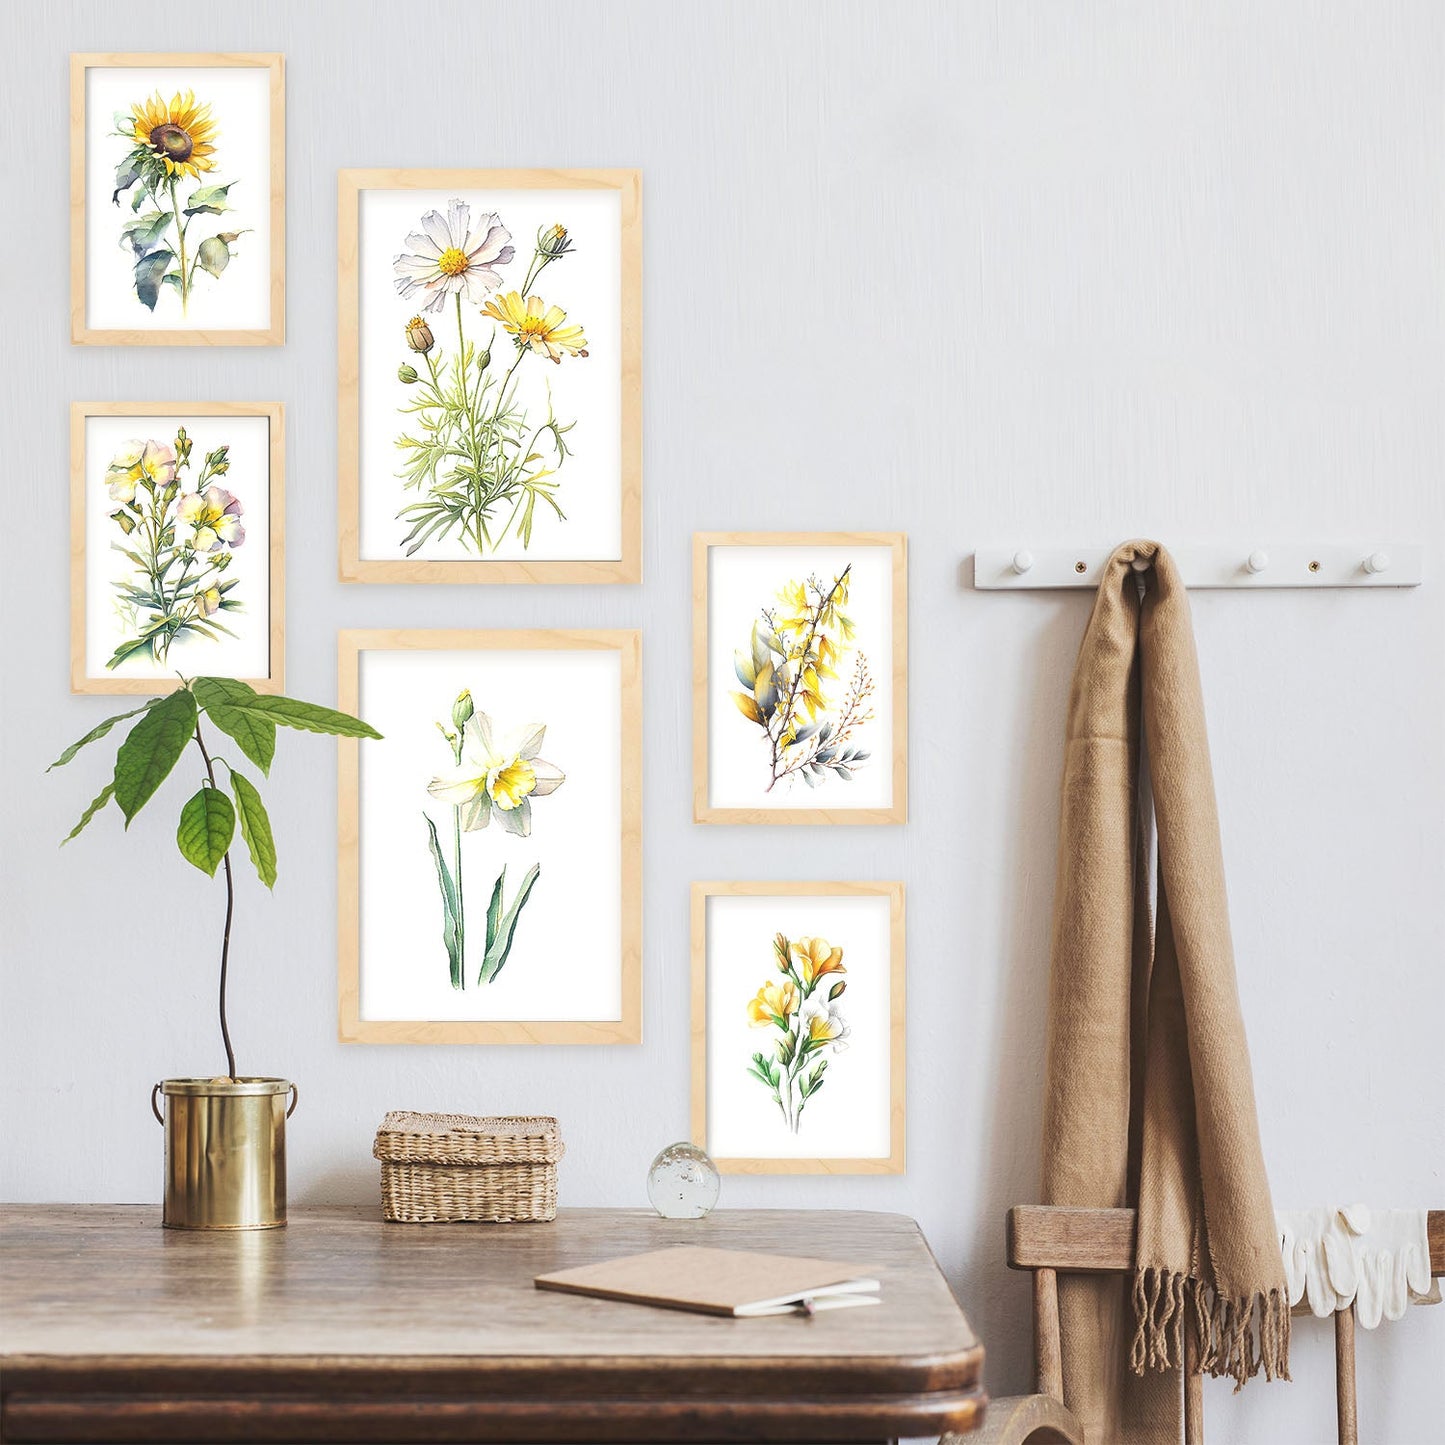 Nacnic Amarillo. Aesthetic Wall Art Prints for Bedroom or Living Room Design.